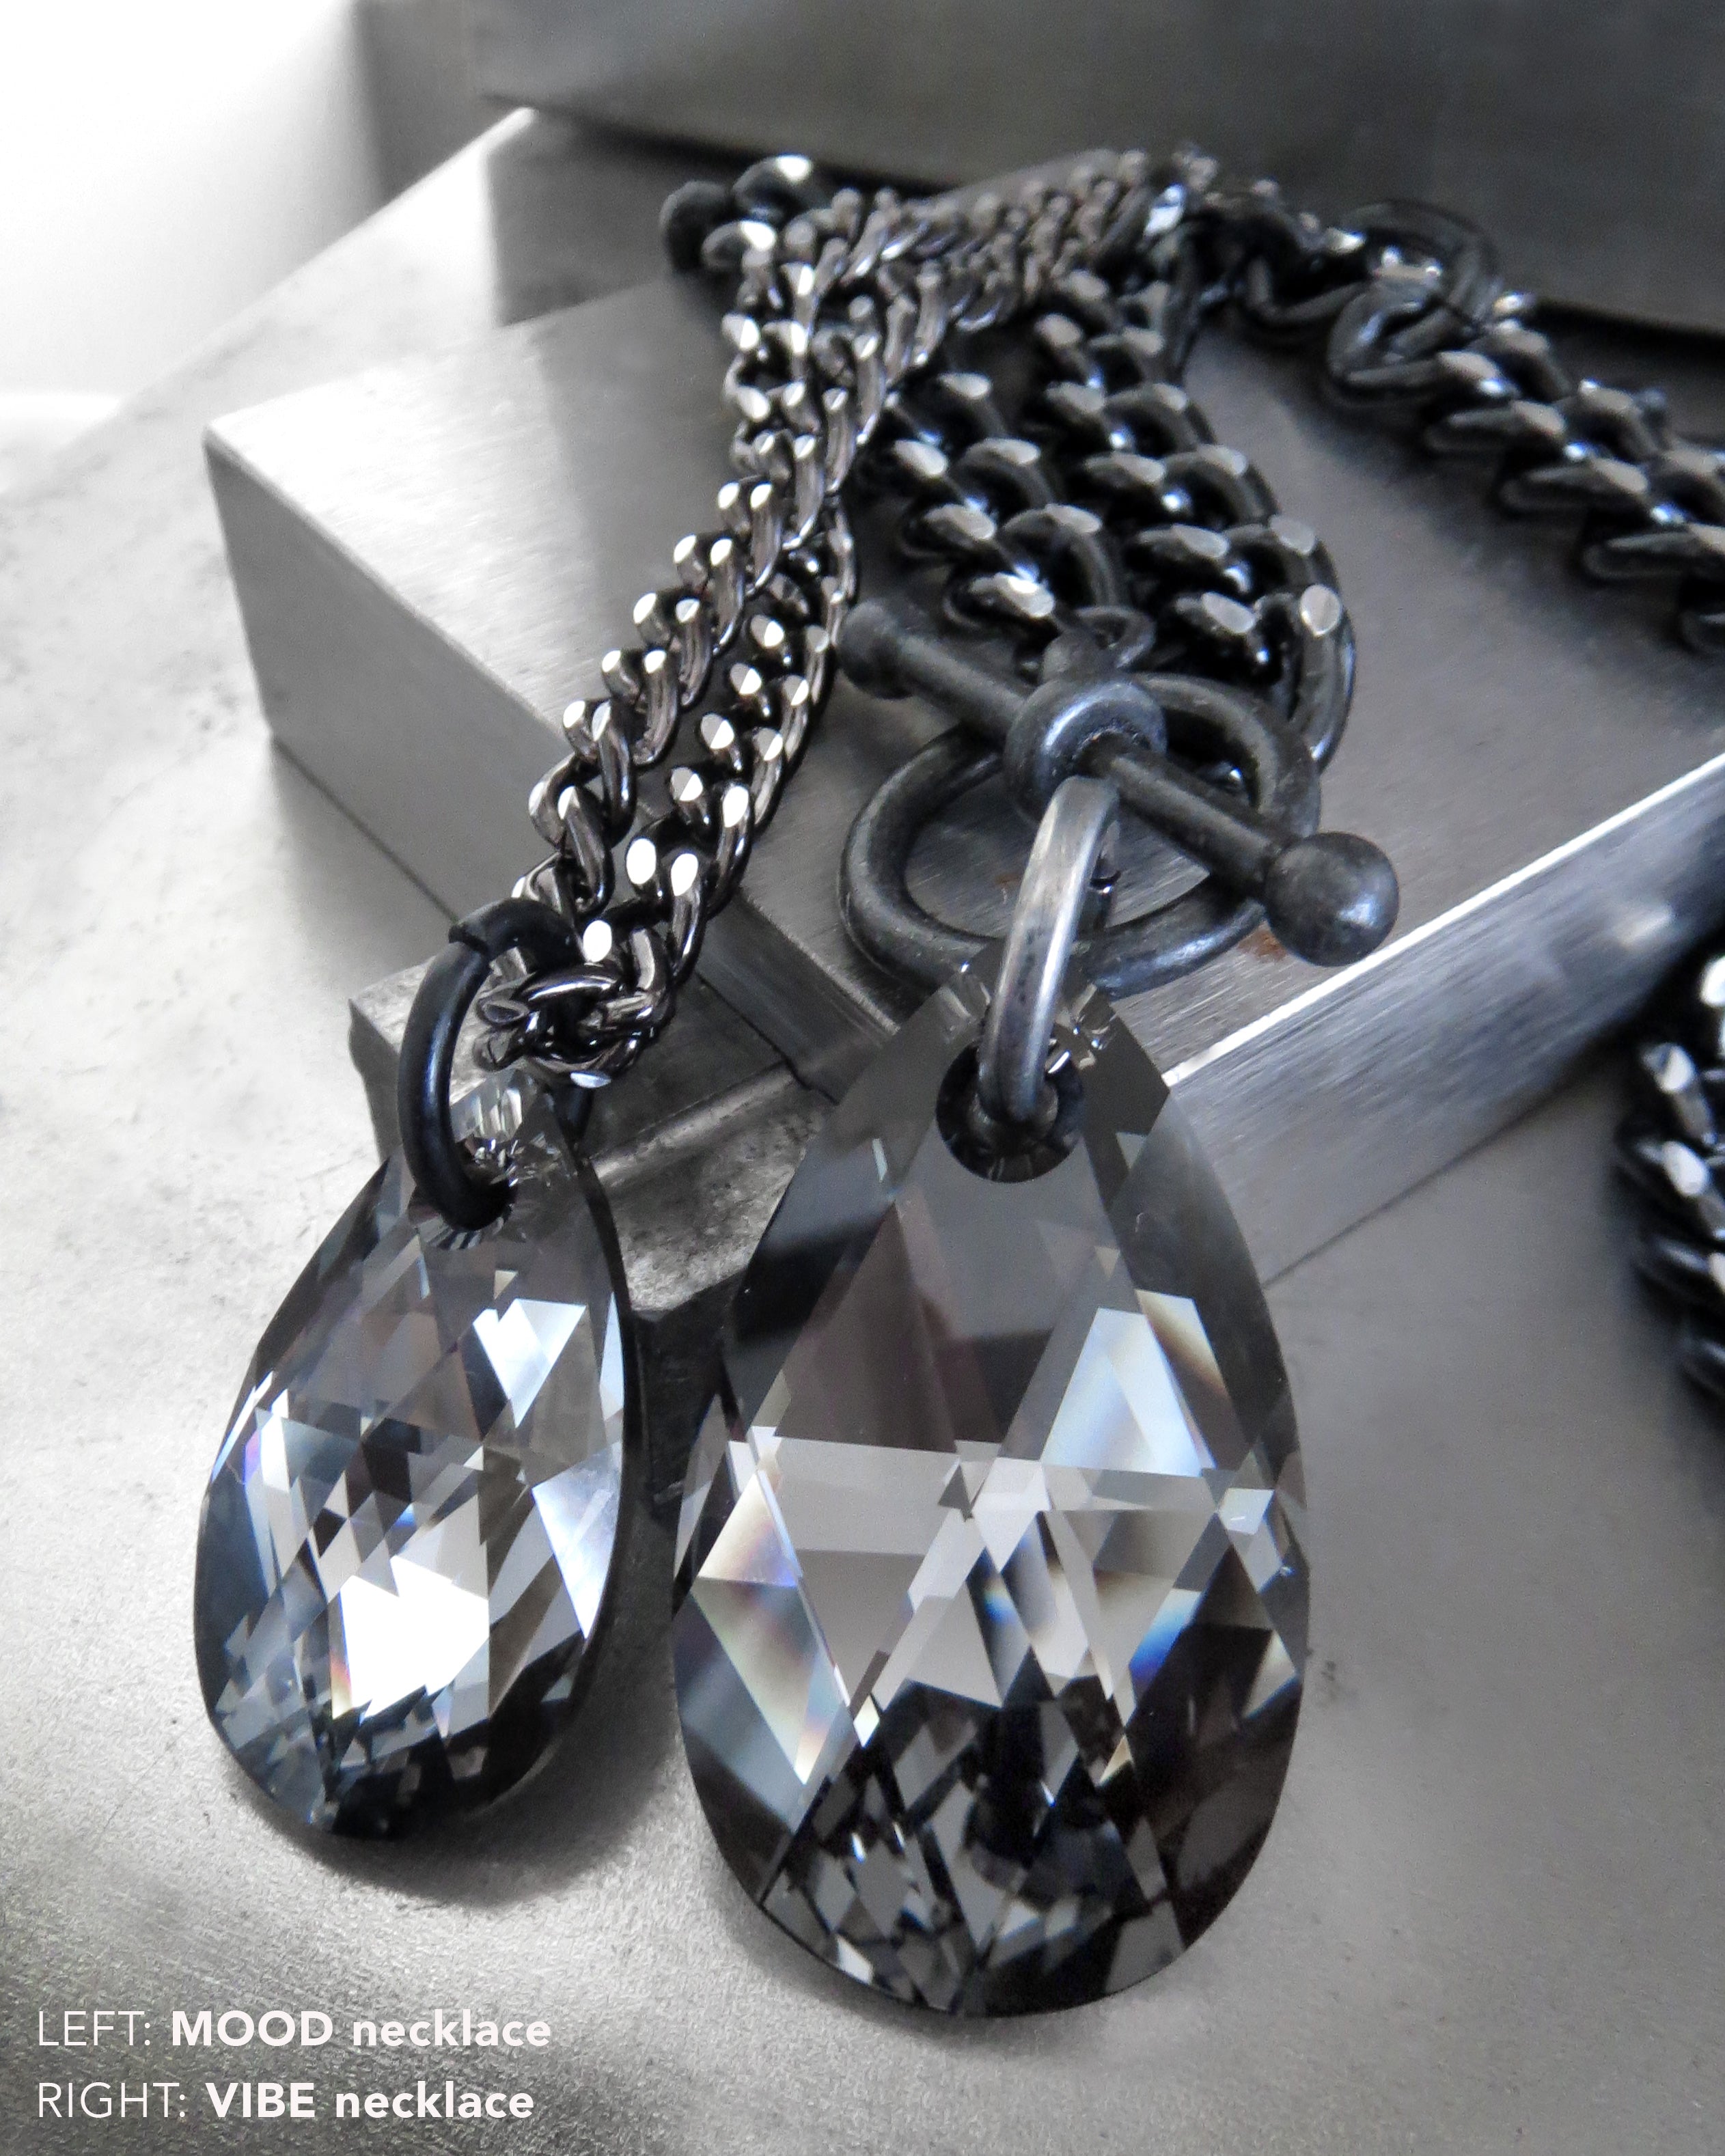 VIBE V3 - Black Teardrop Crystal Necklace with Thick Chain